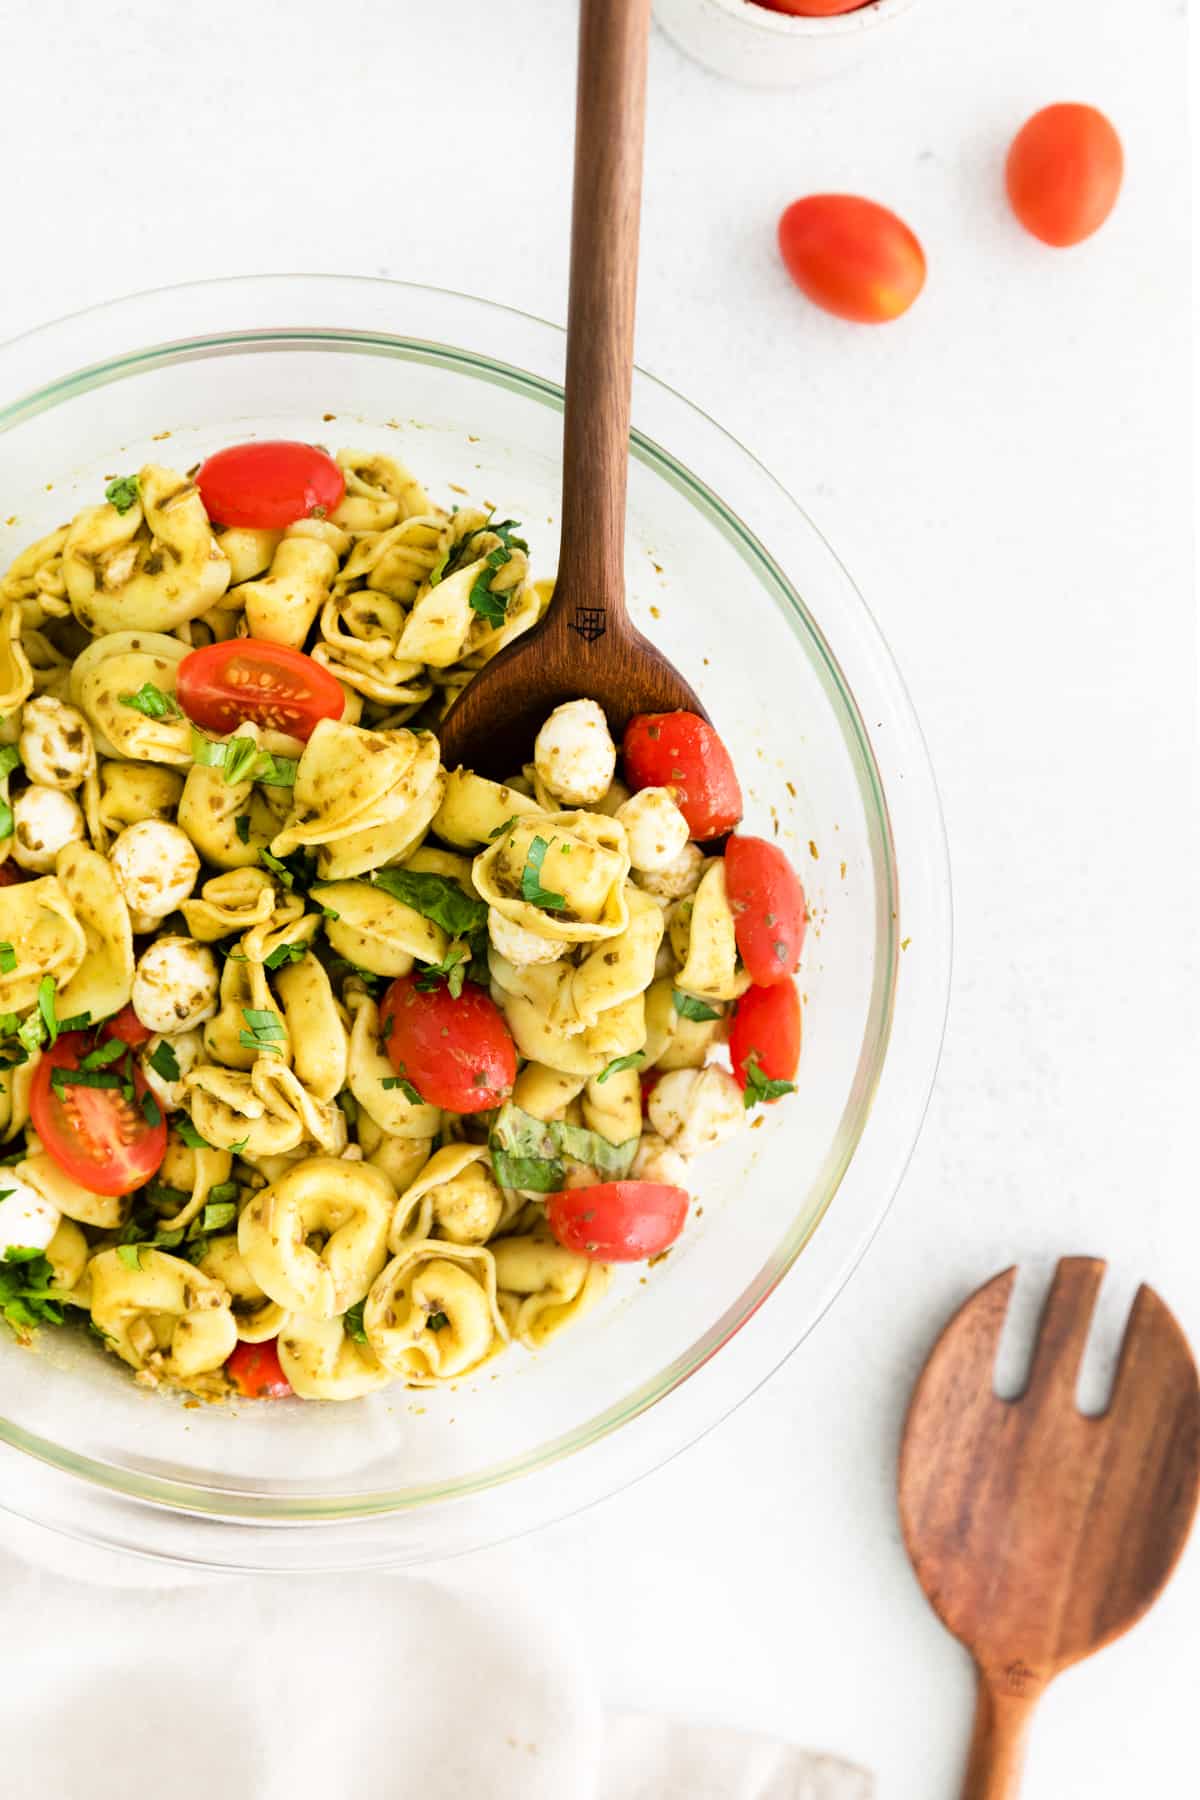 Wooden serving spoon in a bowl of tortellini pasta salad with pesto dressing